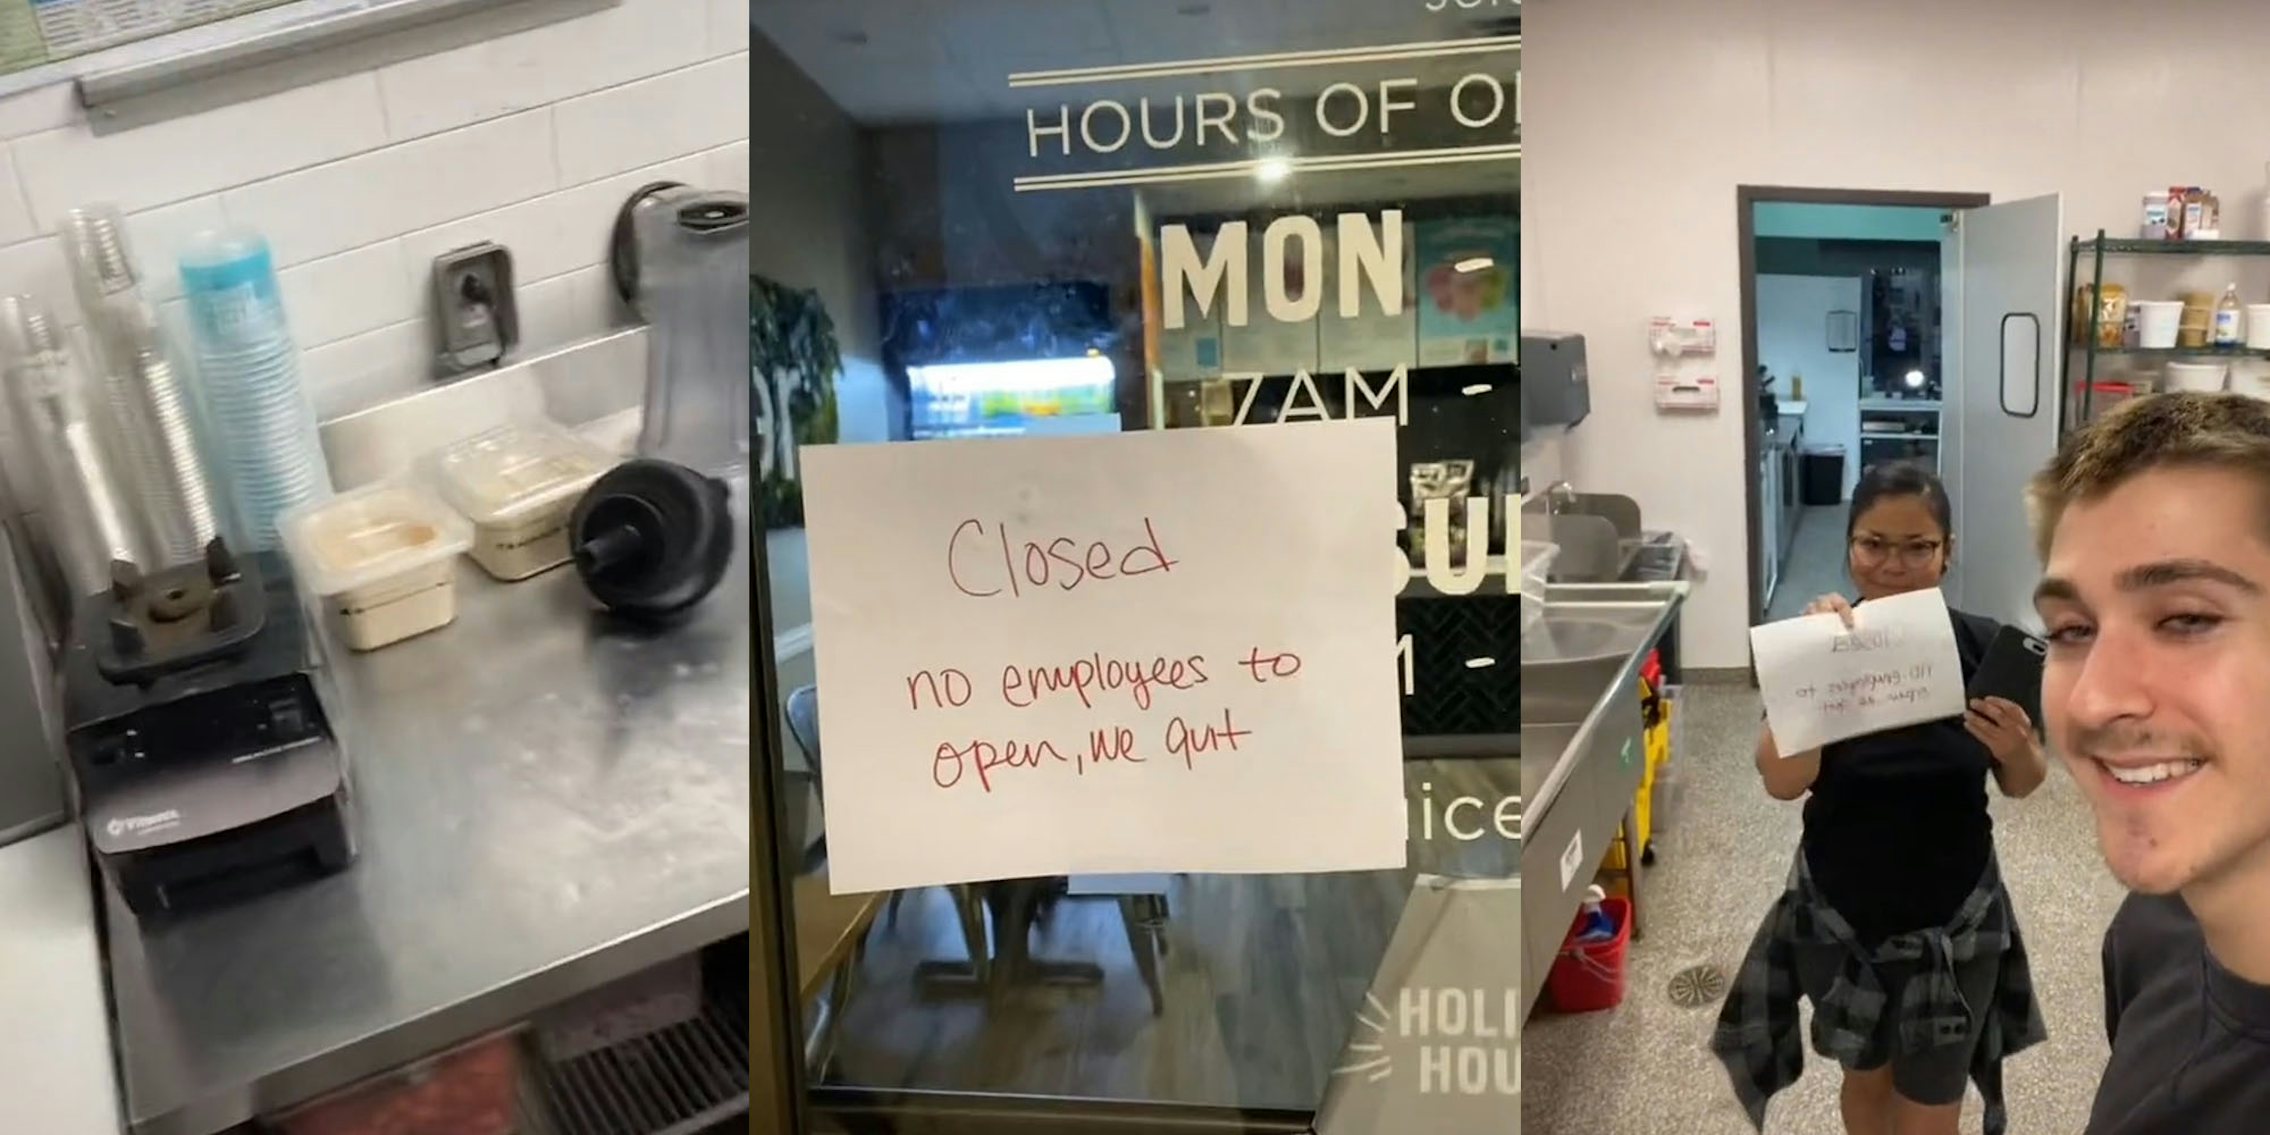 Workers left with messy kitchen (l) Closed sign on window saying ' closed no employees to open, we quit' (c) Two workers in kitchen female worker holding sign (r)os